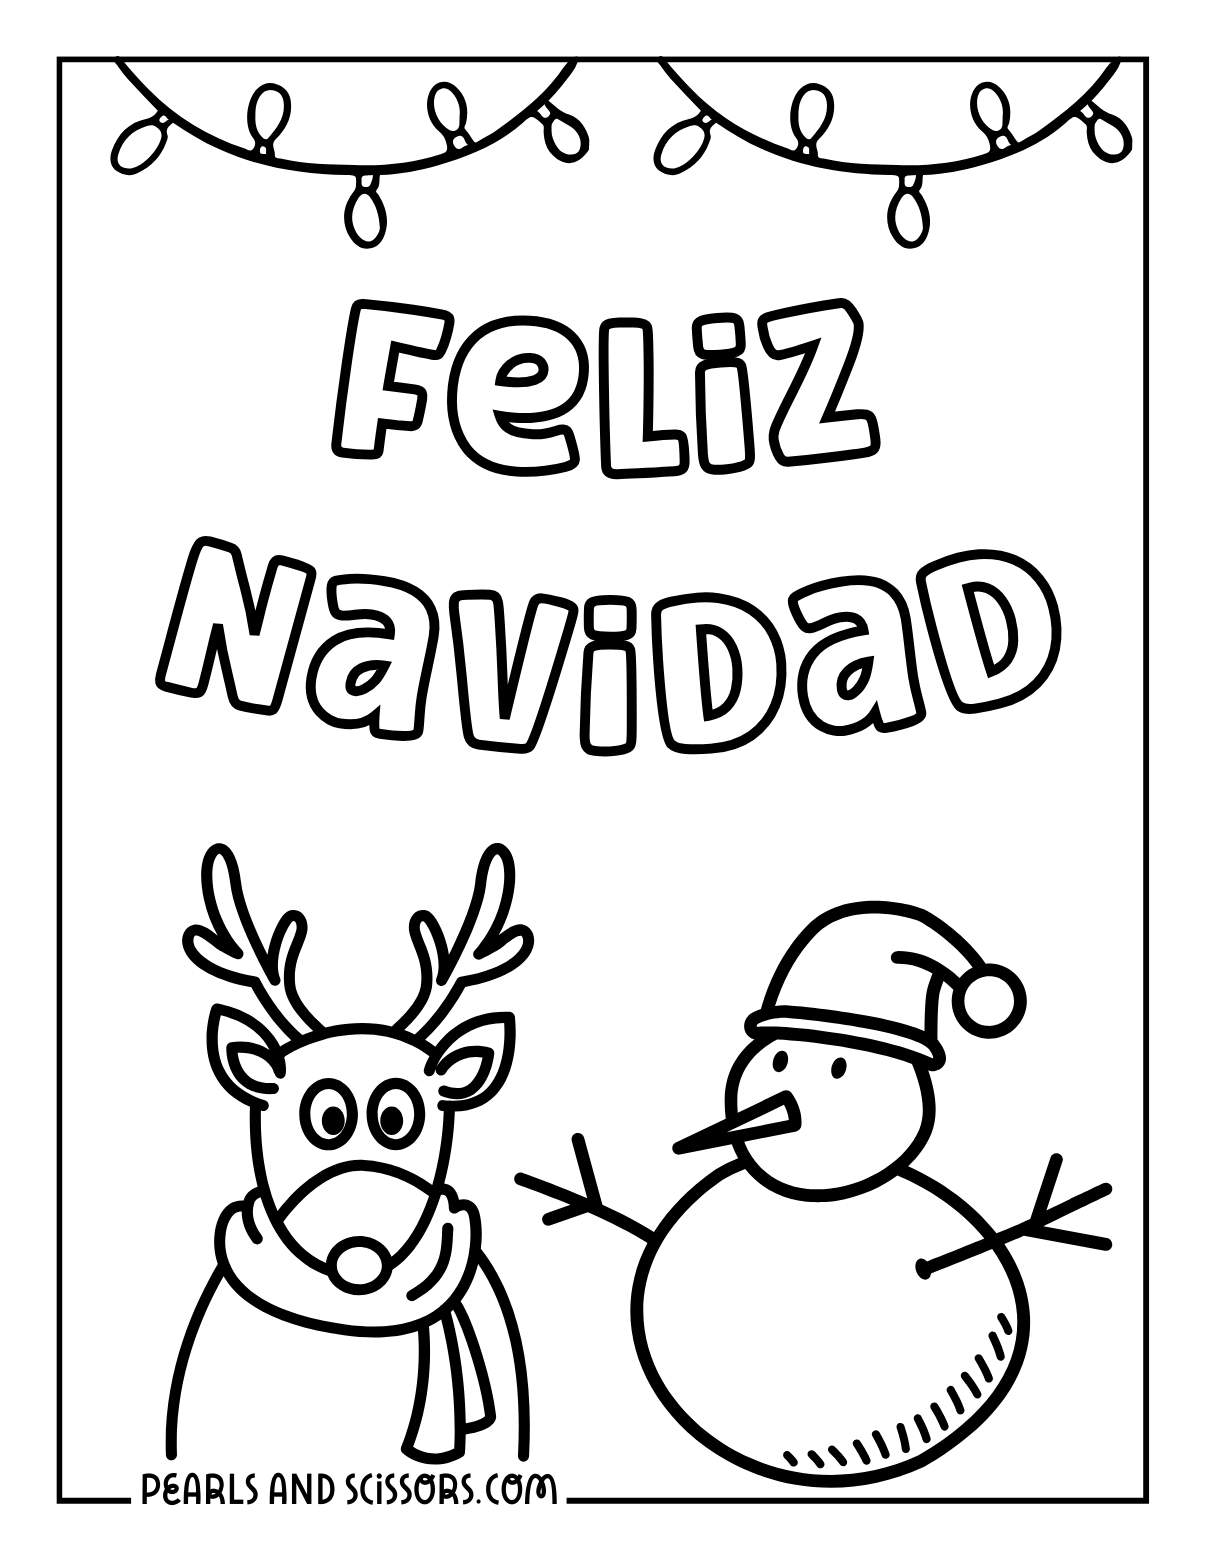 Feliz Navidad with festive lights, a reindeer and snowman Christmas coloring page.